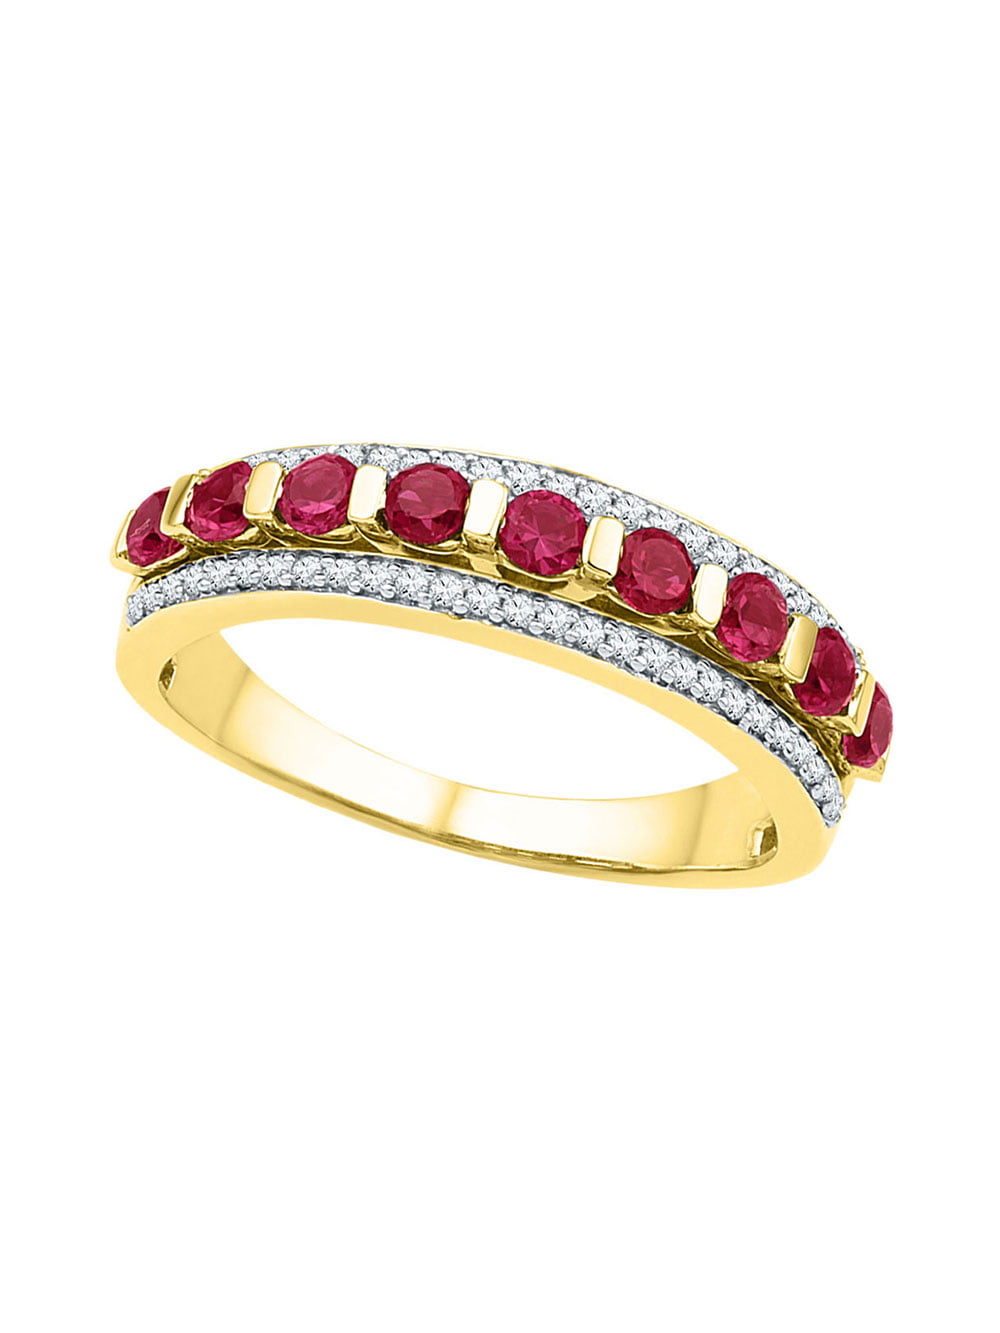 GemApex - 10k Yellow Gold Womens Round Lab-Created Ruby Band Ring 1 ct ...